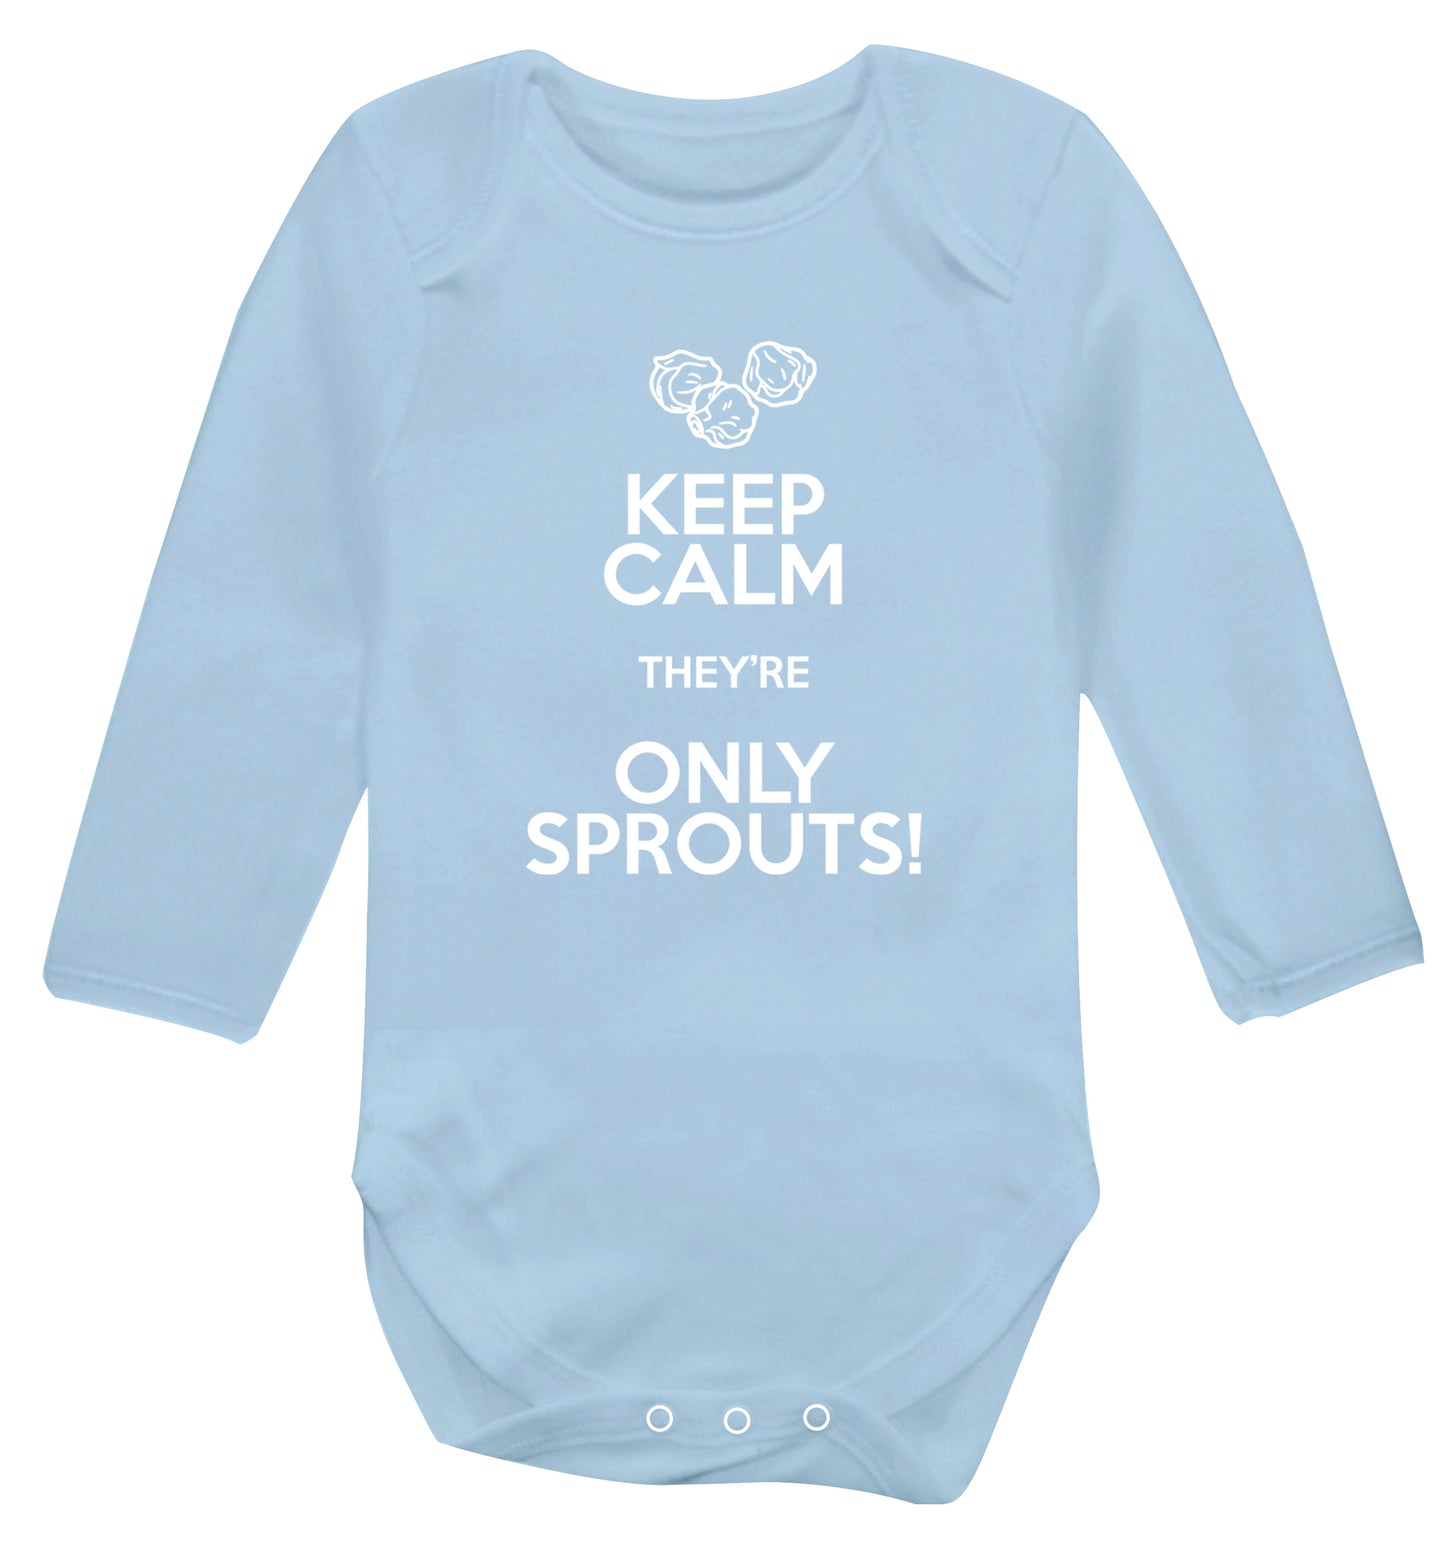 Keep calm they're only sprouts Baby Vest long sleeved pale blue 6-12 months